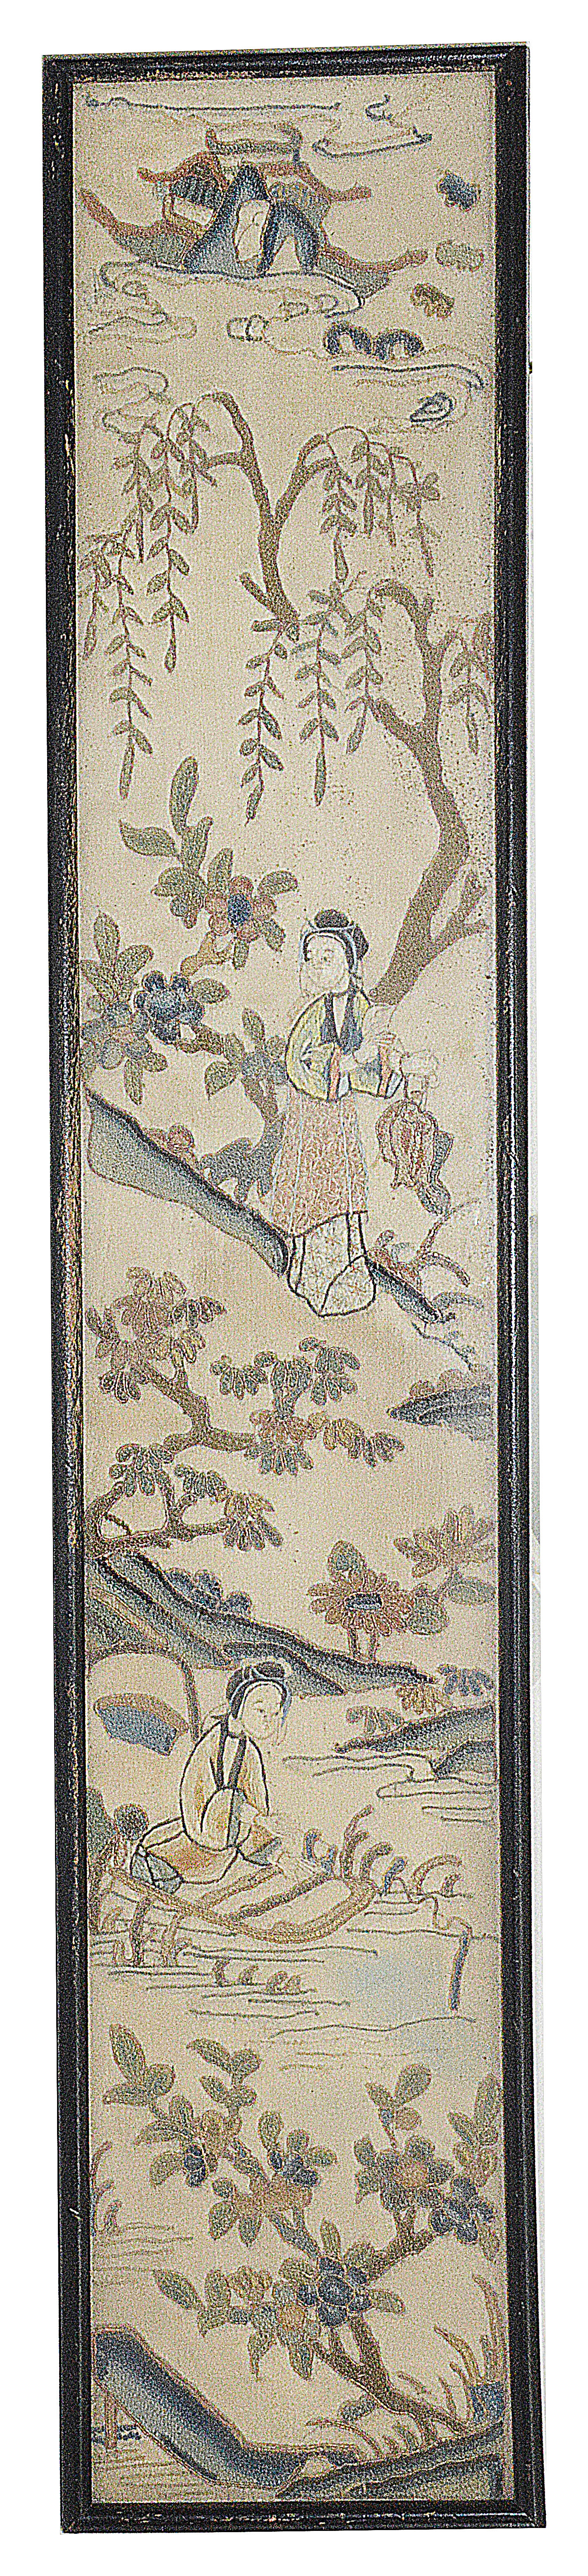 A late 19th/early 20th c. embroidered Chinese panel